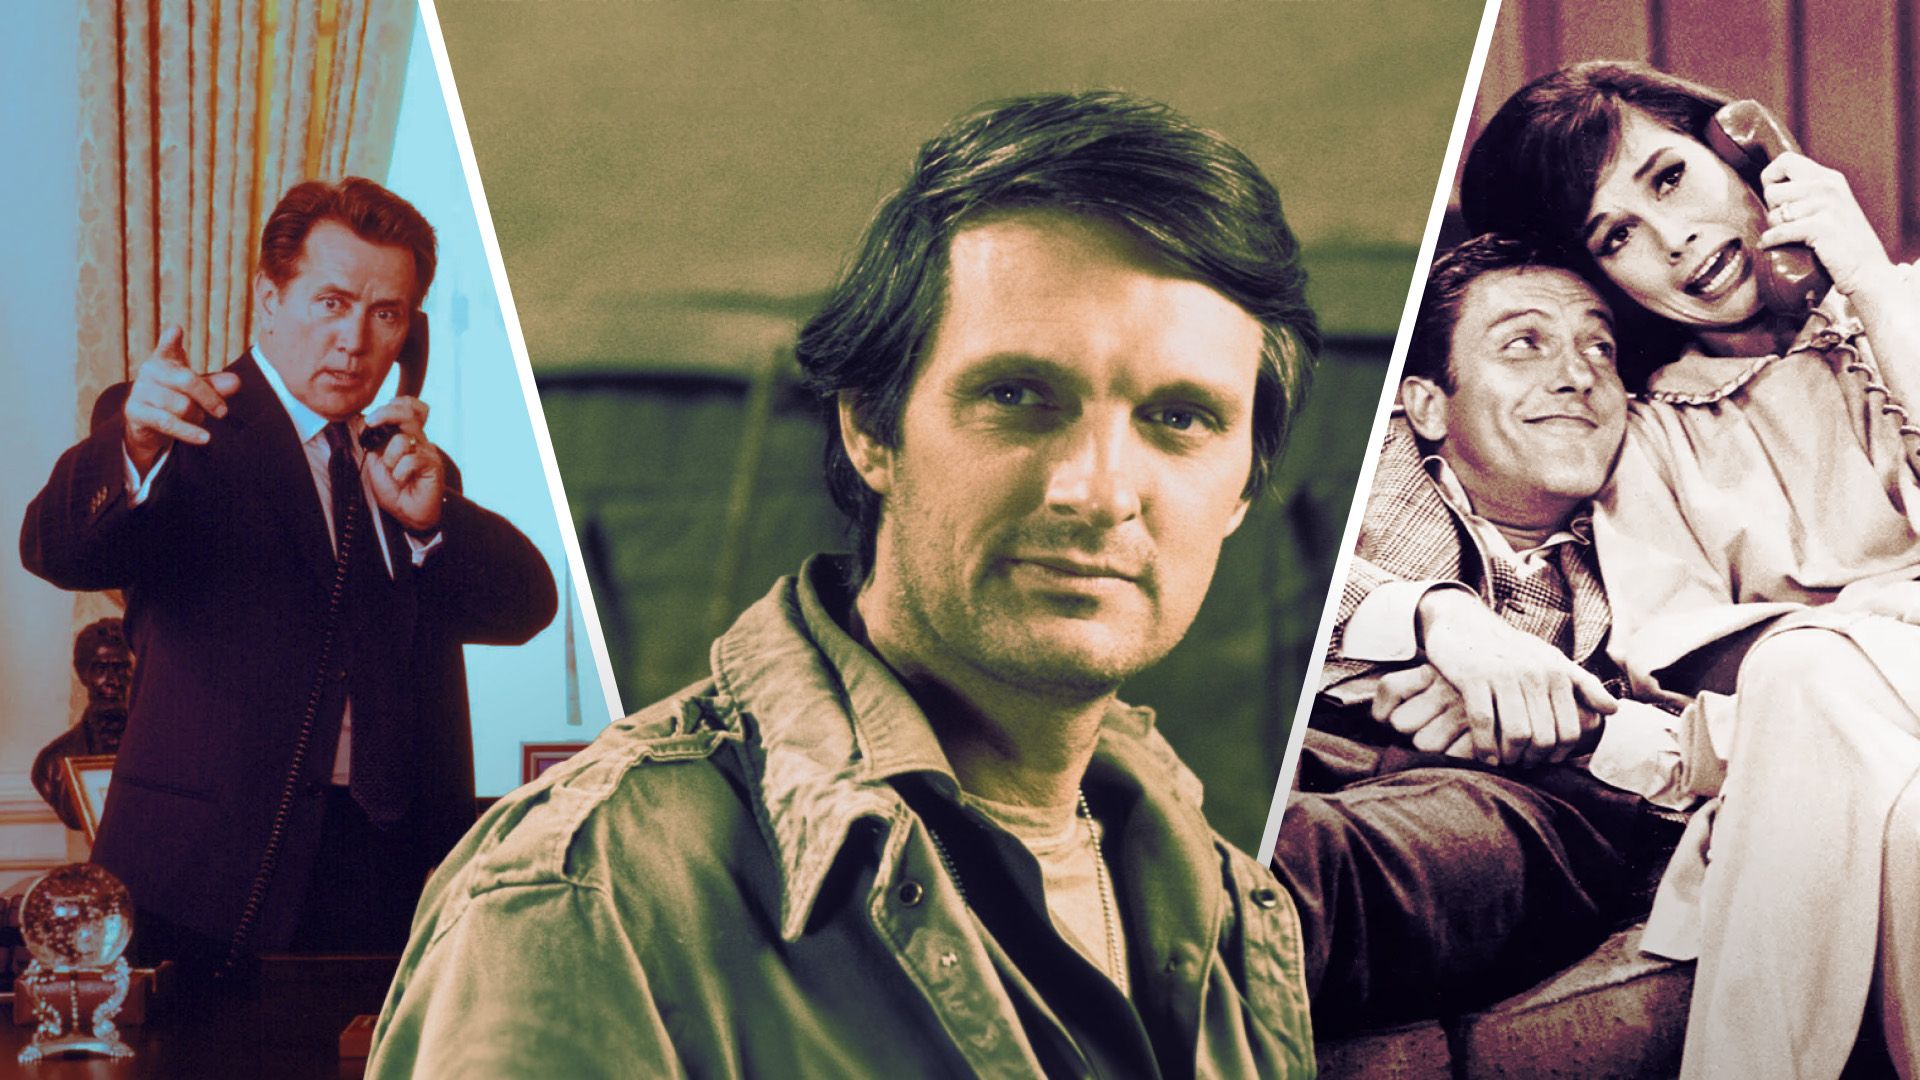 15 Best-Written TV Shows of All Time, According to the Writers Guild of America